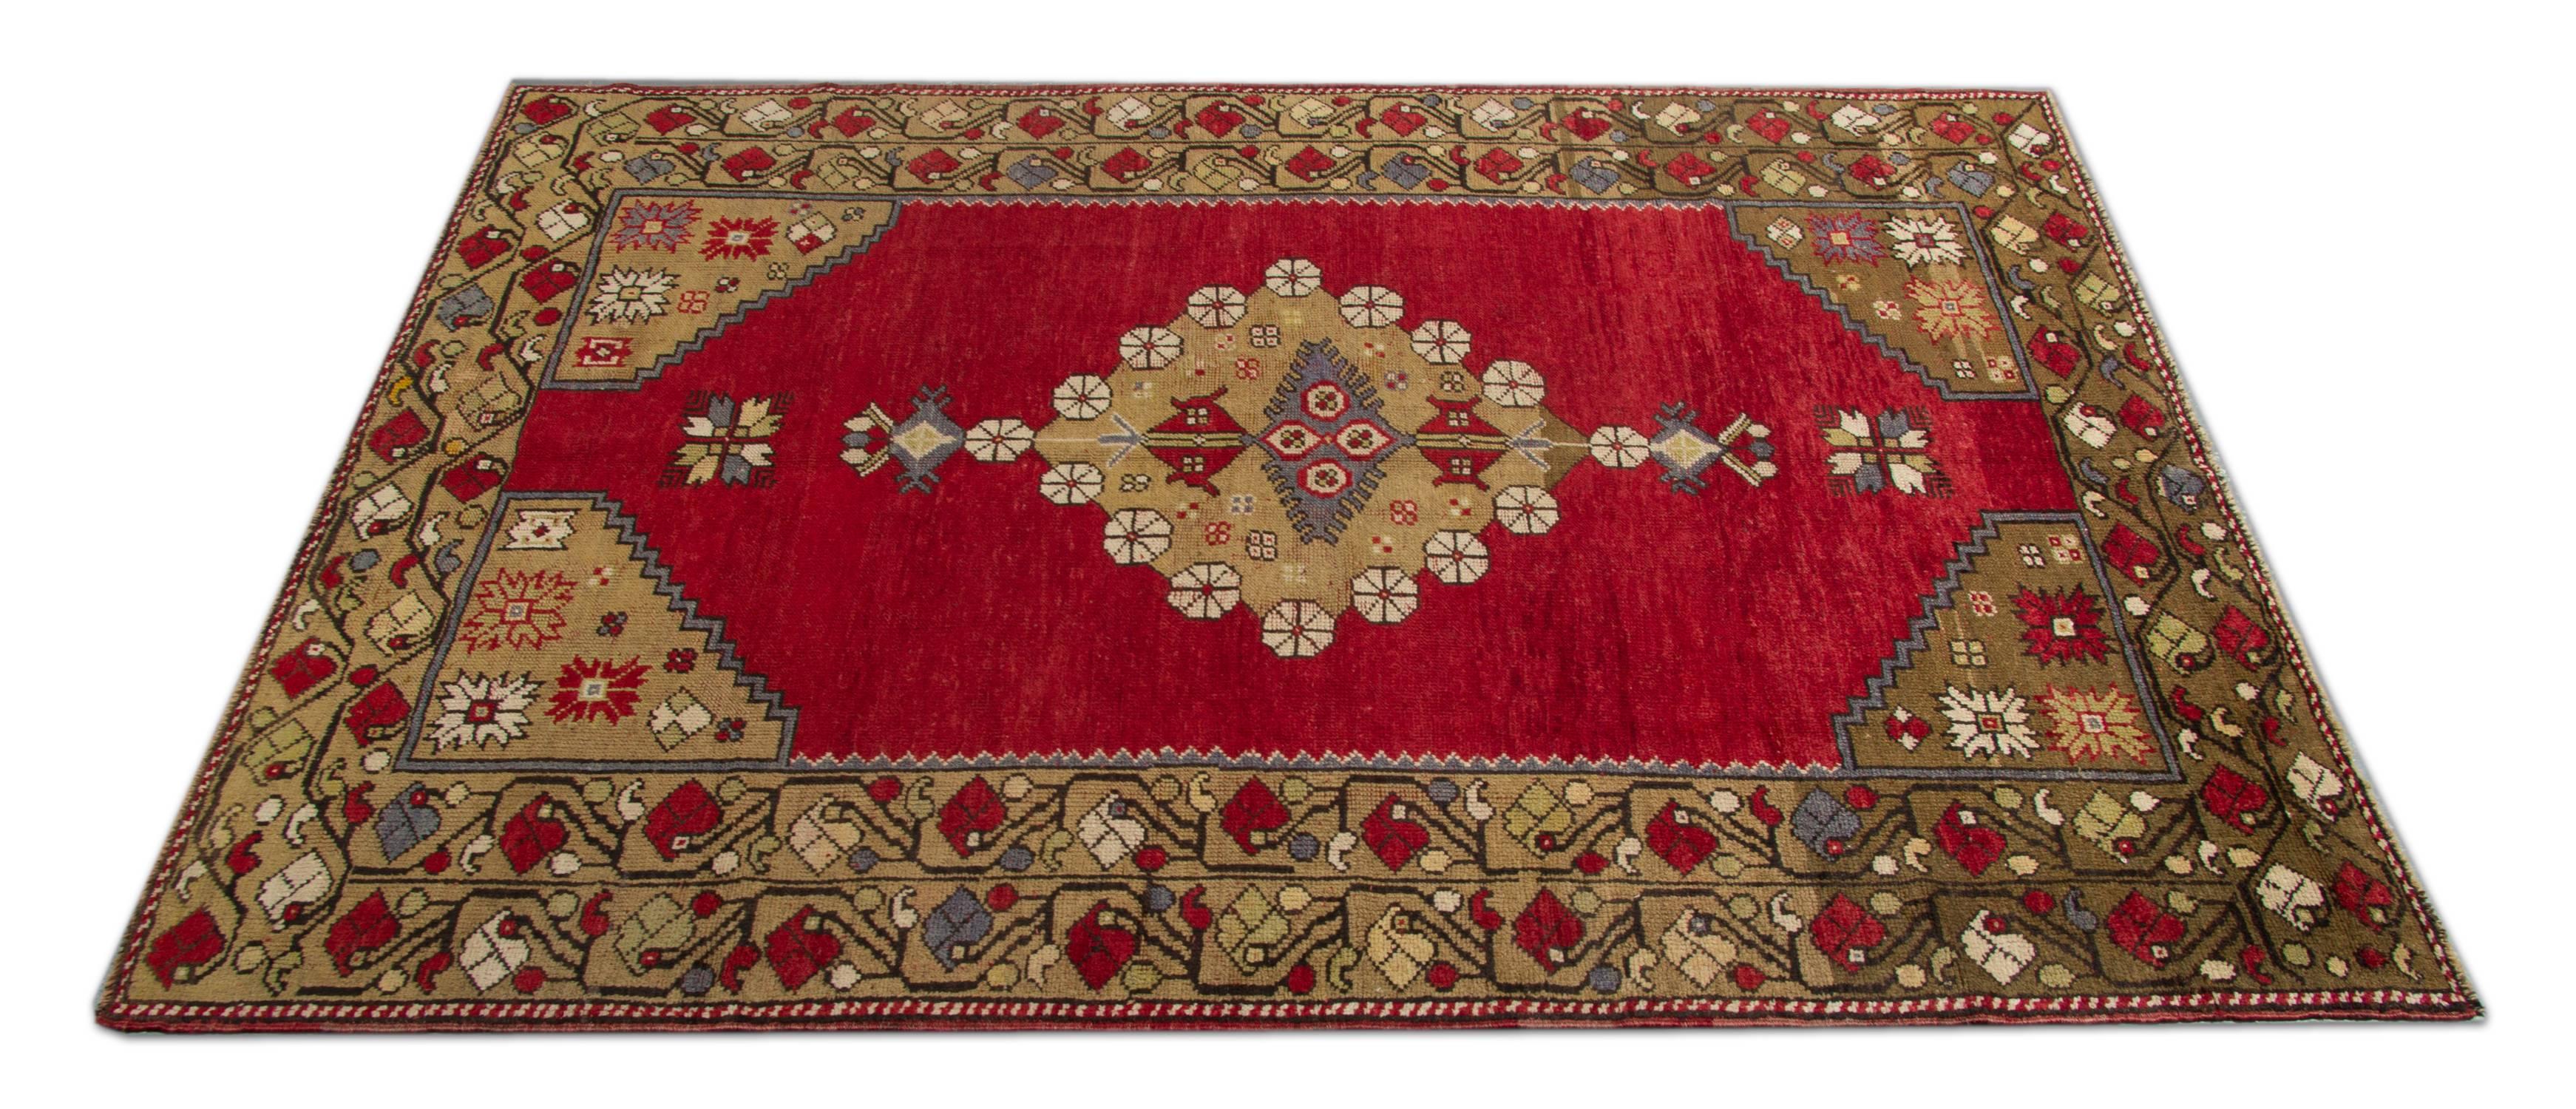 Old Handmade carpet Anatolian antique rugs with a red rug background and contrasting central gold medallion. This carpet Oriental rug is Ushak and is in excellent condition. It can be an excellent selection as living room rugs and dining room